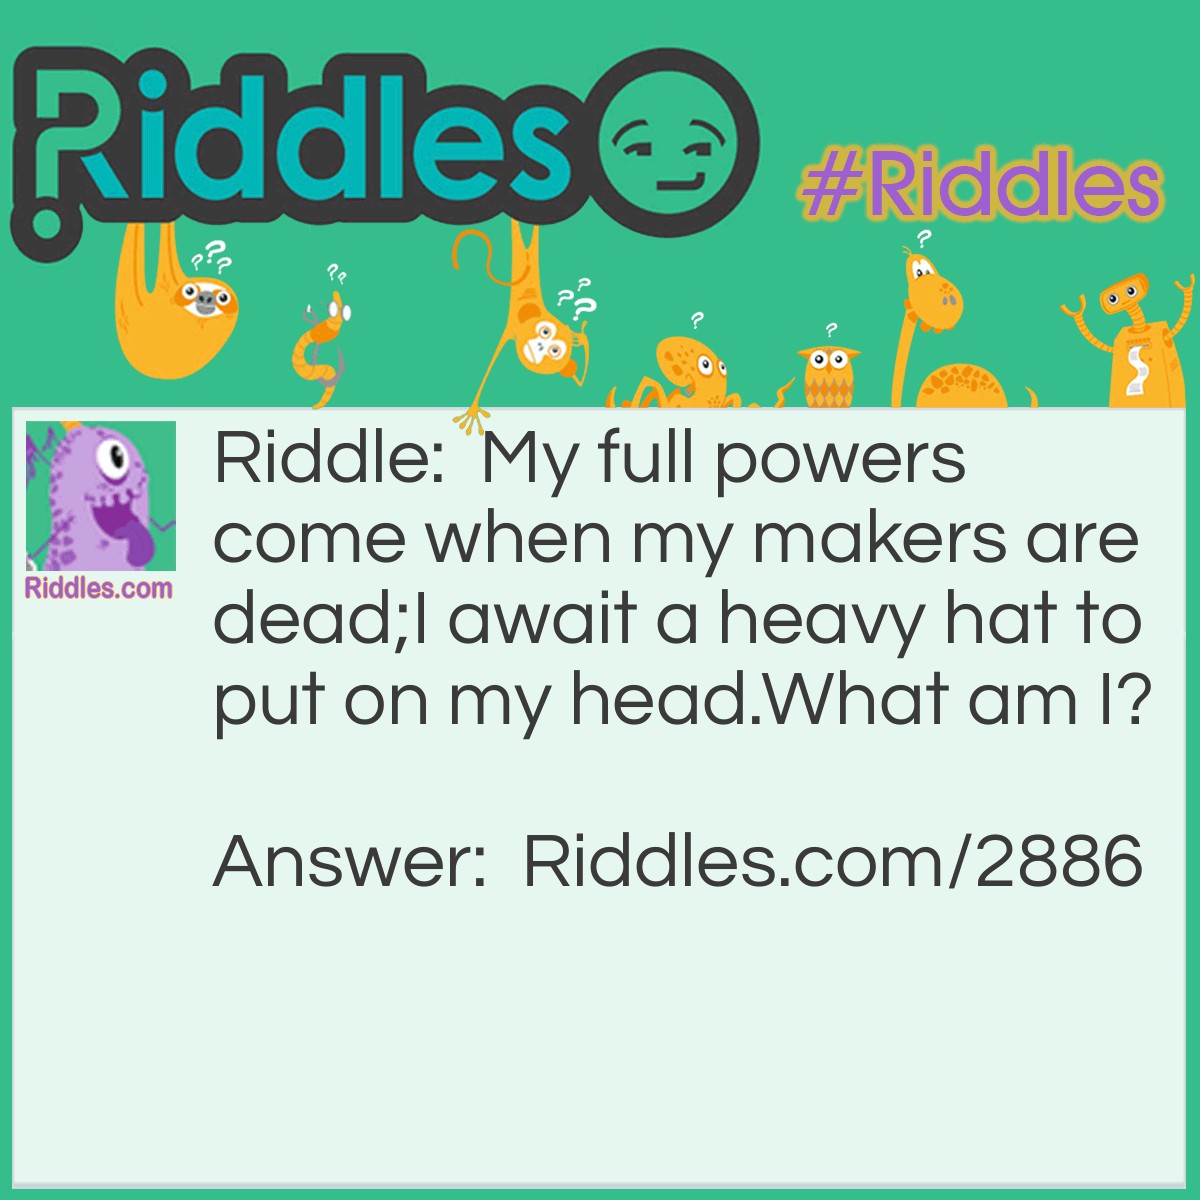 Riddle: My full powers come when my makers are dead; I await a heavy hat to put on my head. What am I? Answer: Prince.